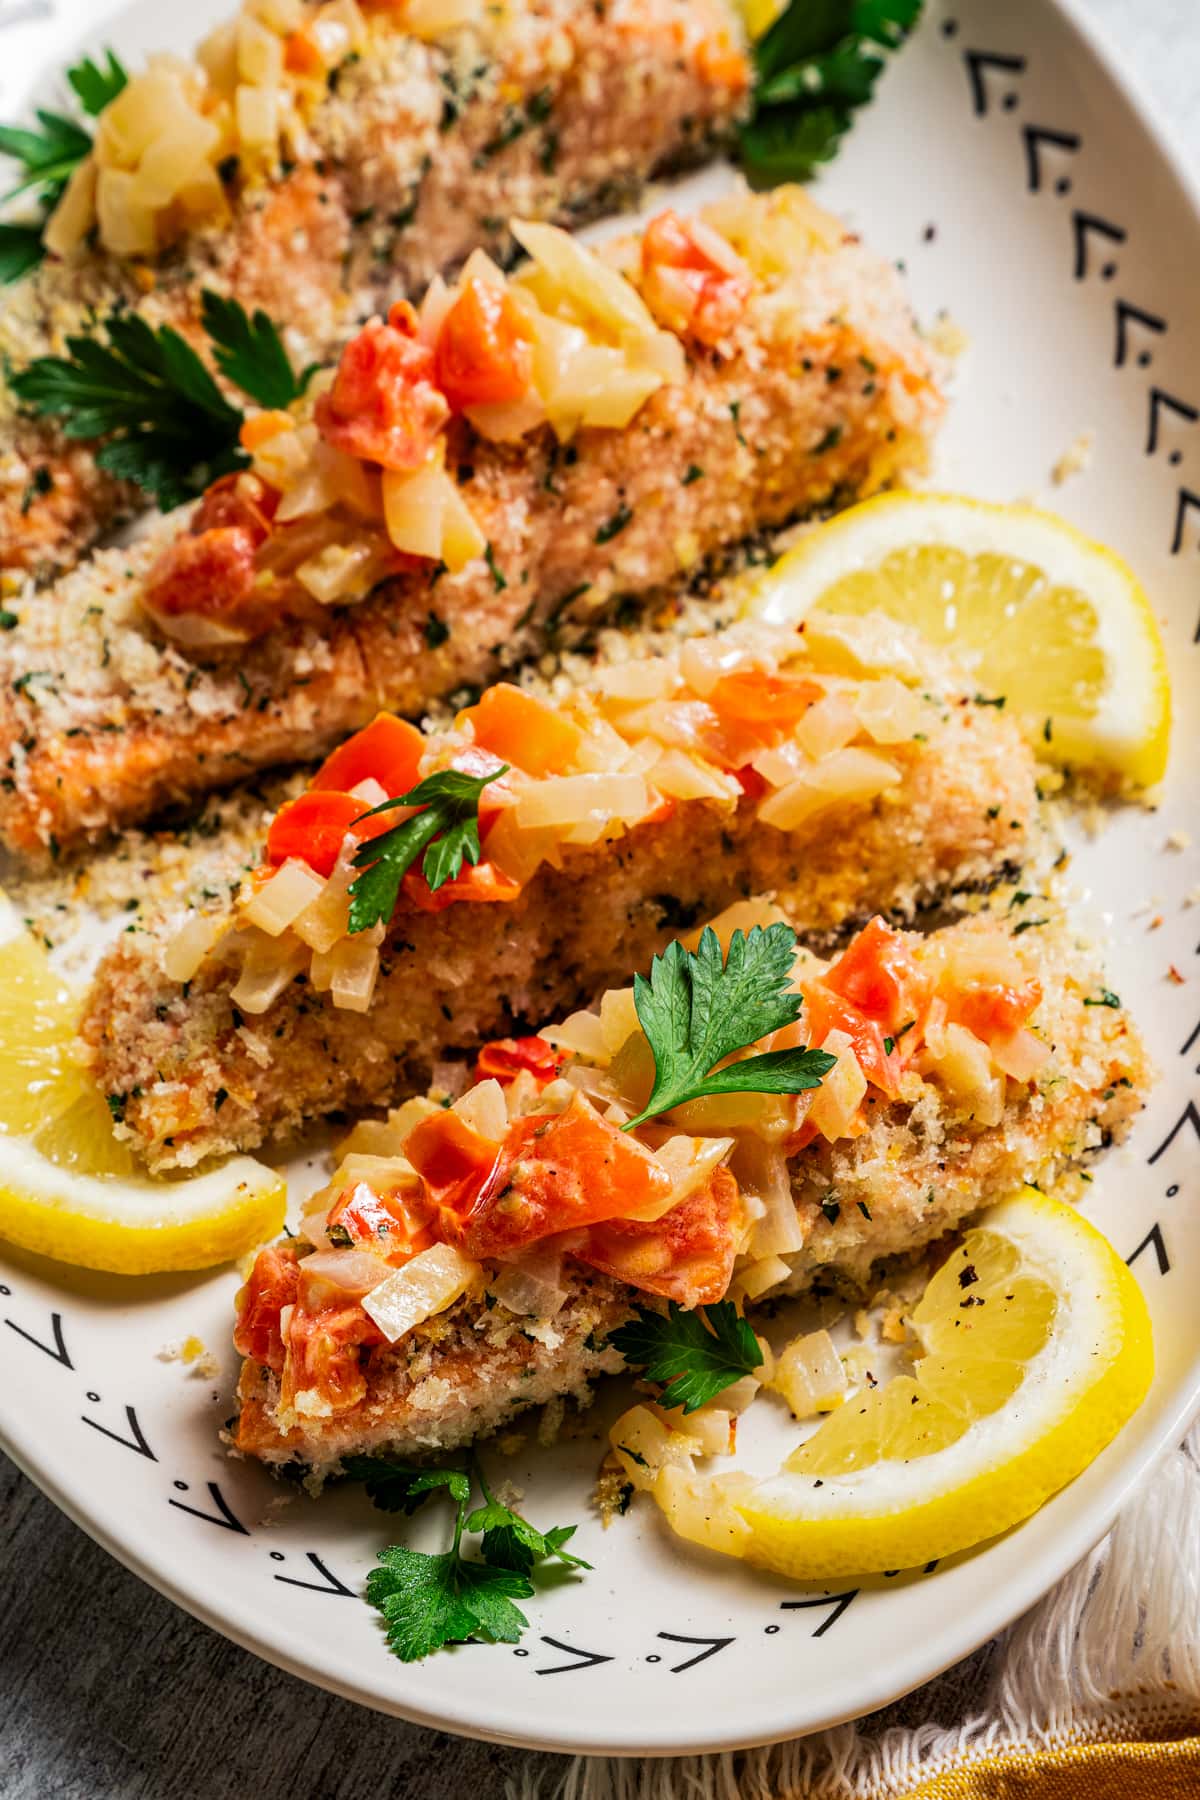 Panko-crusted salmon filets on a platter next to a lemon wedge, topped with Tuscan tomato sauce.